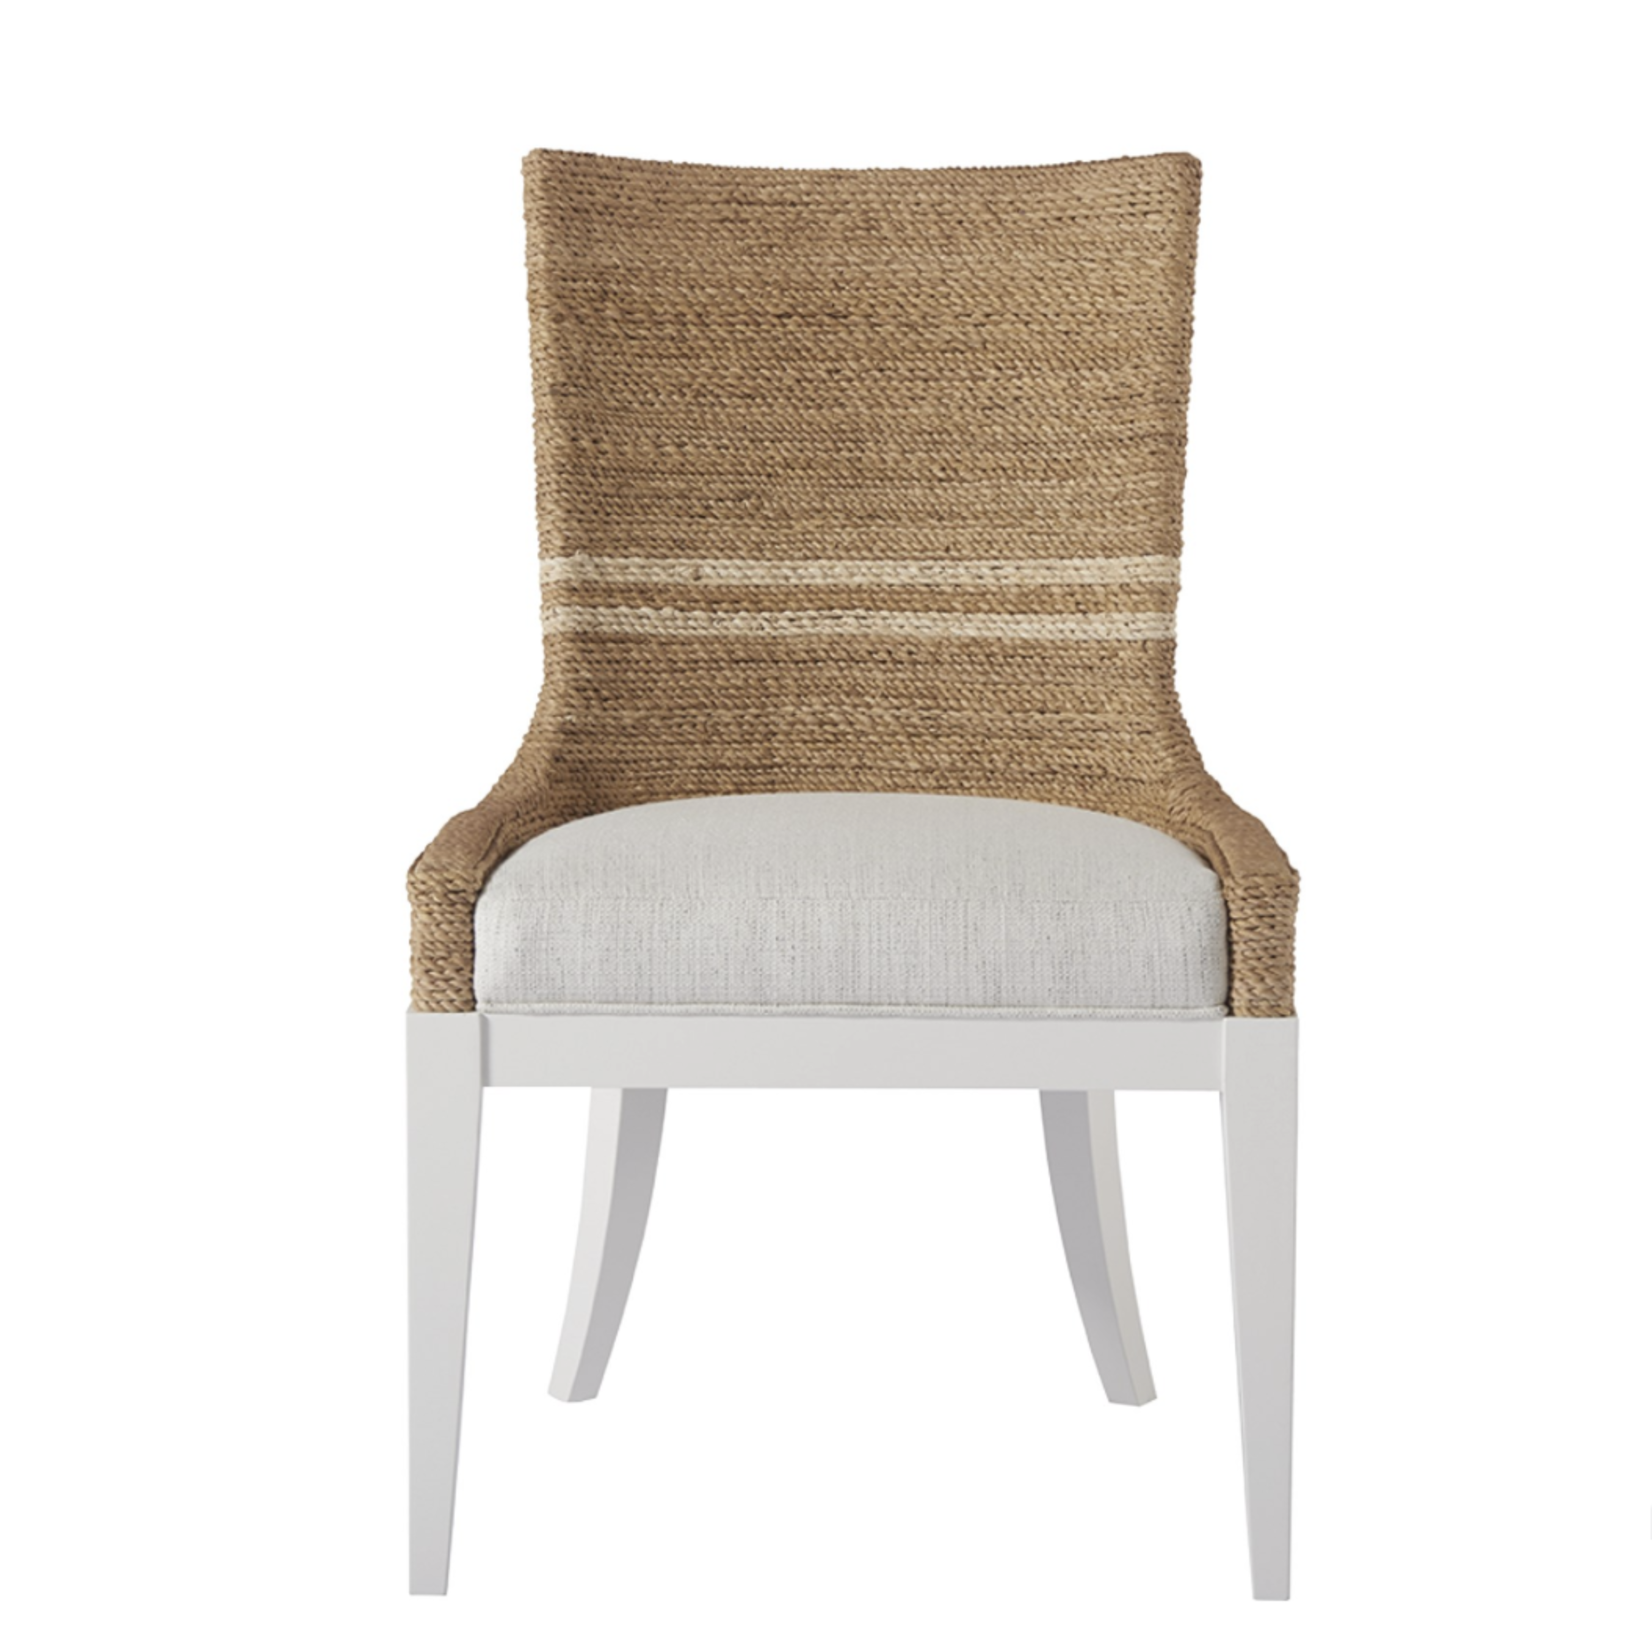 Outside The Box Siesta Key Abaca Rope Woven & Dove Live Smart Performance Wood Dining Chair